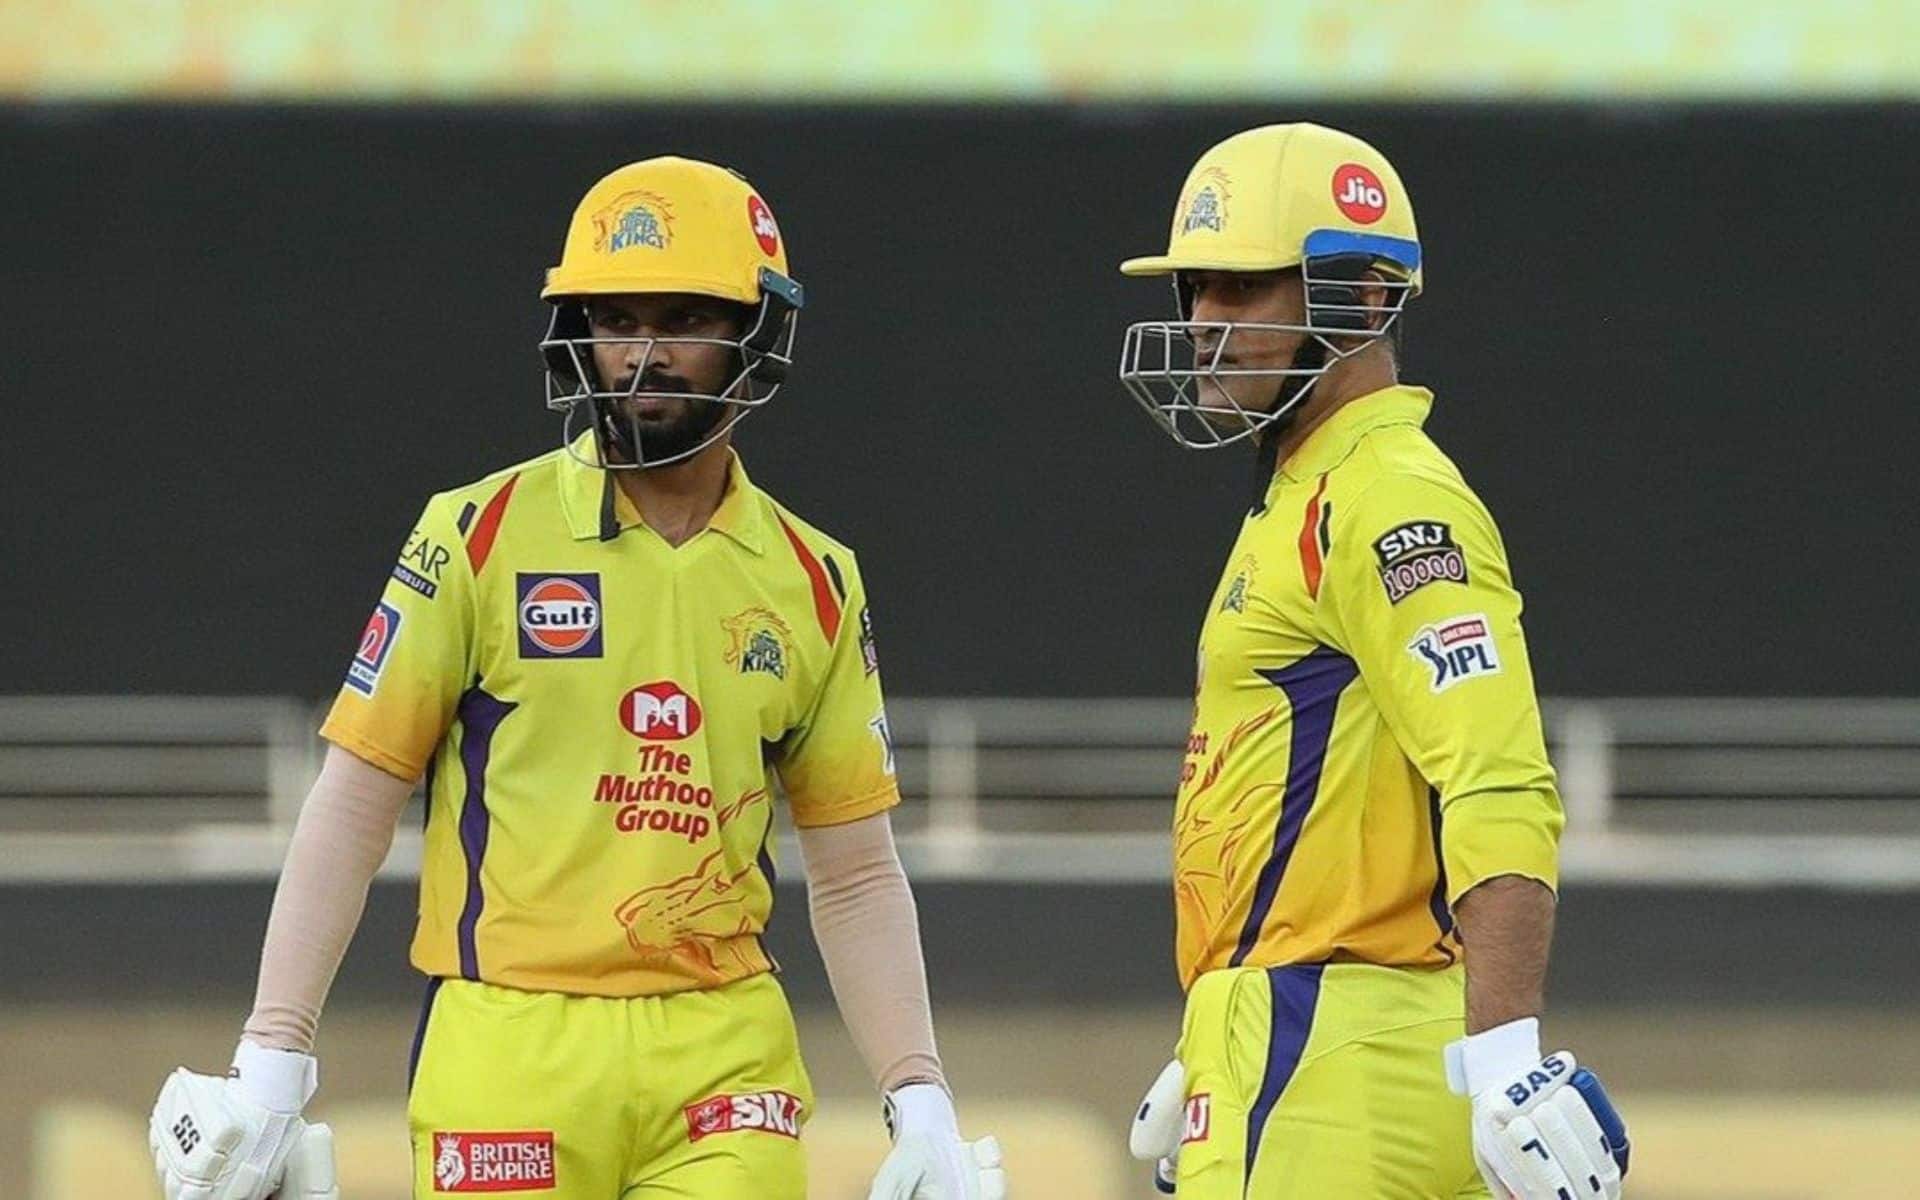 Gaikwad and Dhoni together for CSK (X.com)